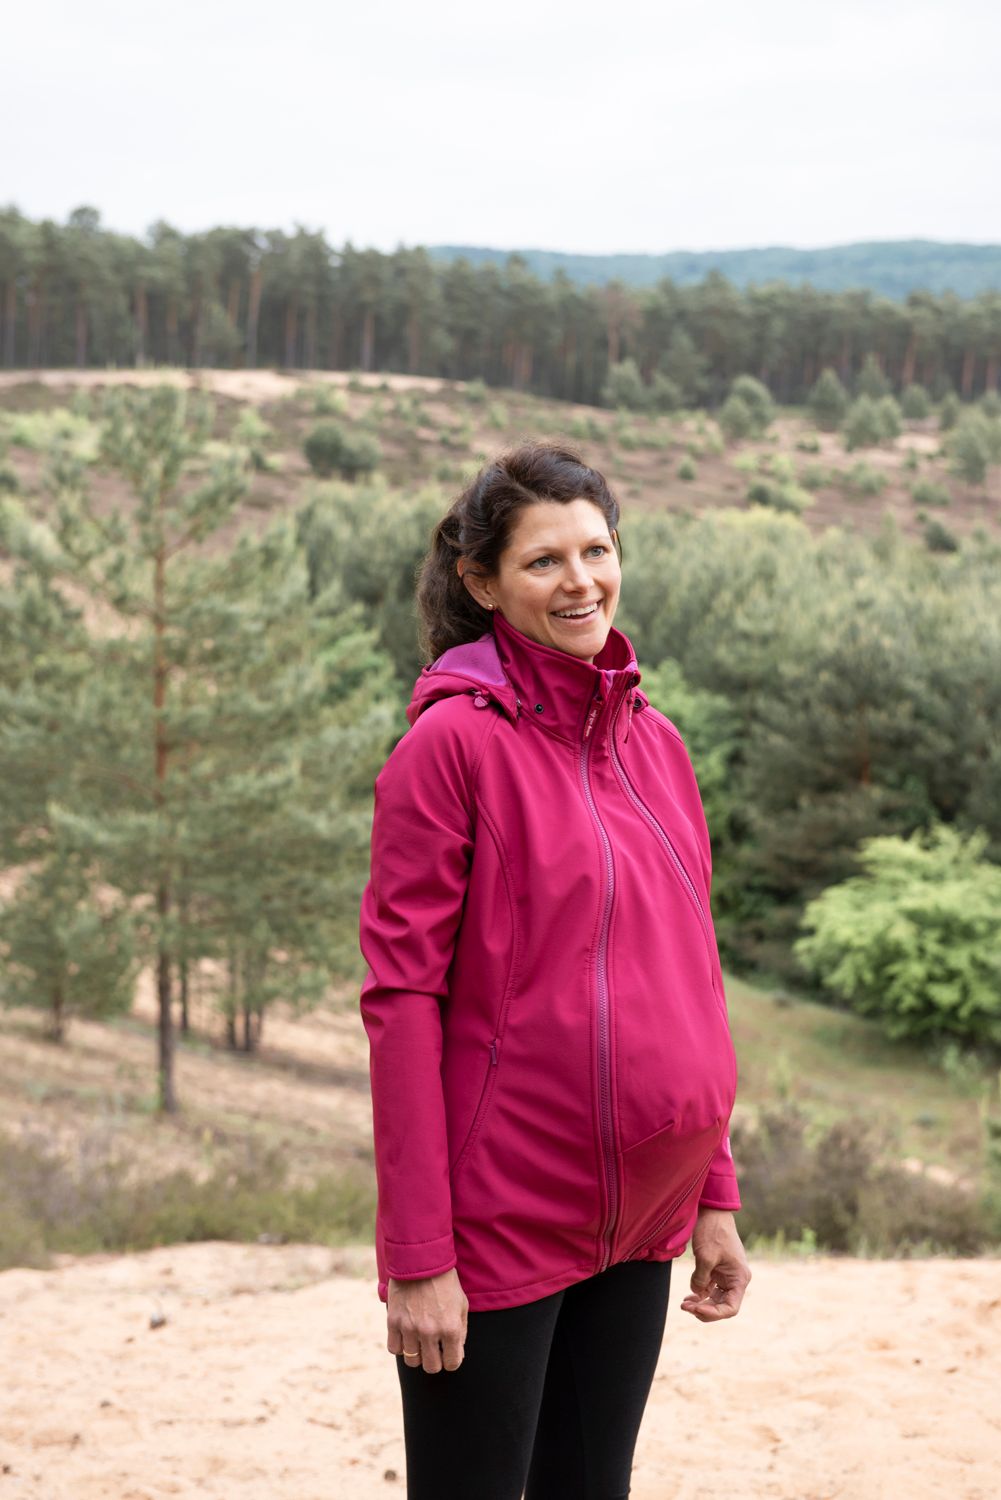 A woman with dark hair in a ponytail standing outdoors on a hill wearing the Mamalila Allrounder Babwywearing Jacket in Berry with the maternity insert zipped in.